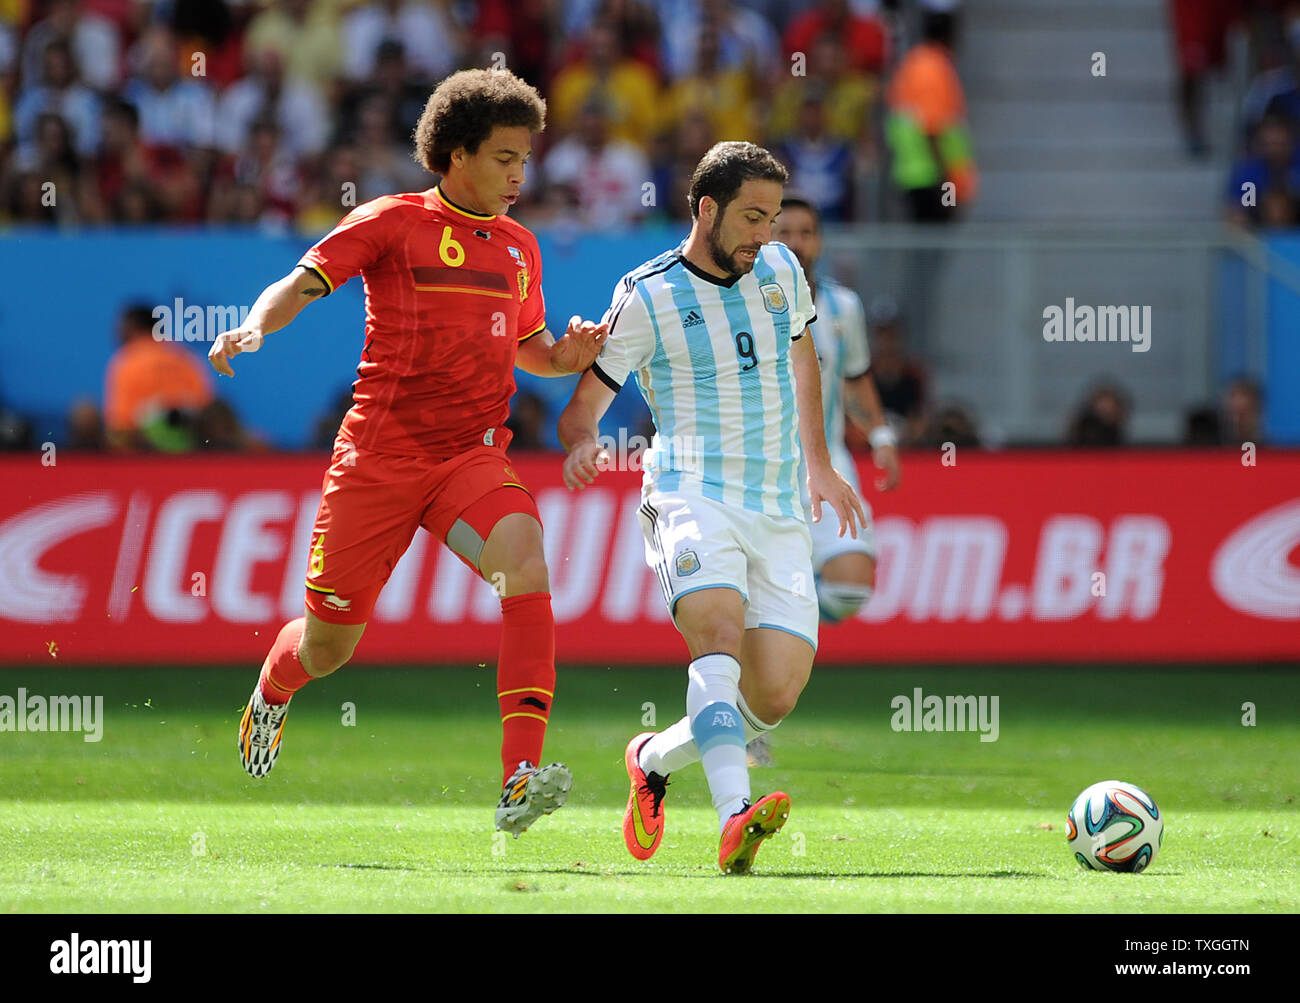 Gonzalo Higuain of Argentina competes with Axel Witsel (L) of Belgium during the 2014 FIFA World Cup Quarter Final match at the Estadio Nacional in Brasilia, Brazil on July 05, 2014. UPI/Chris Brunskill Stock Photo